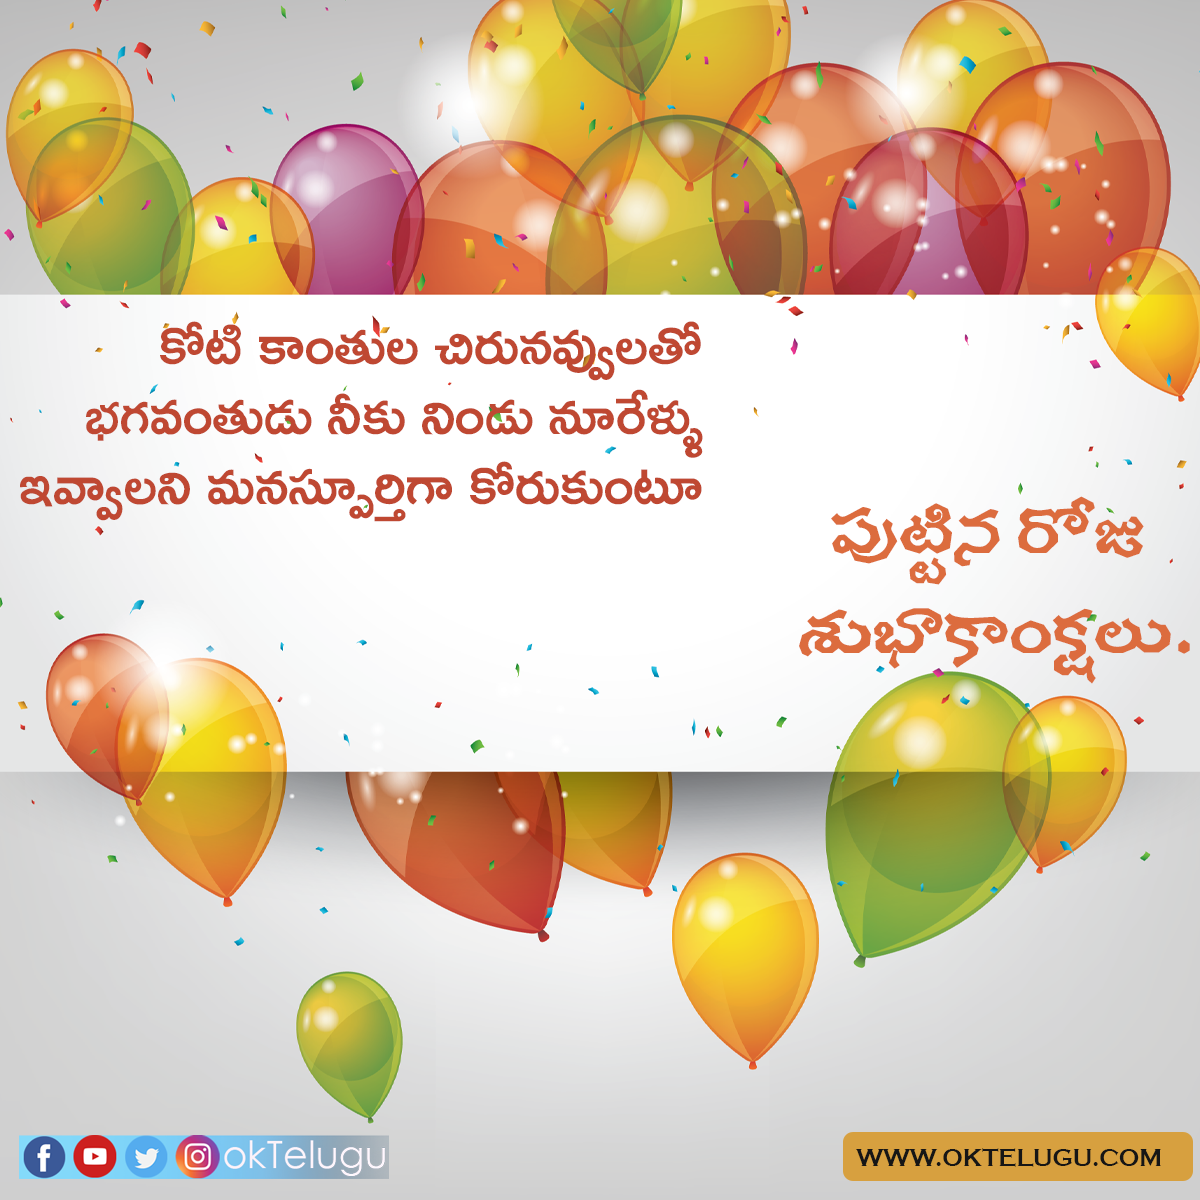 Happy Birthday Greetings Wishes, quotes, Messages in Telugu 